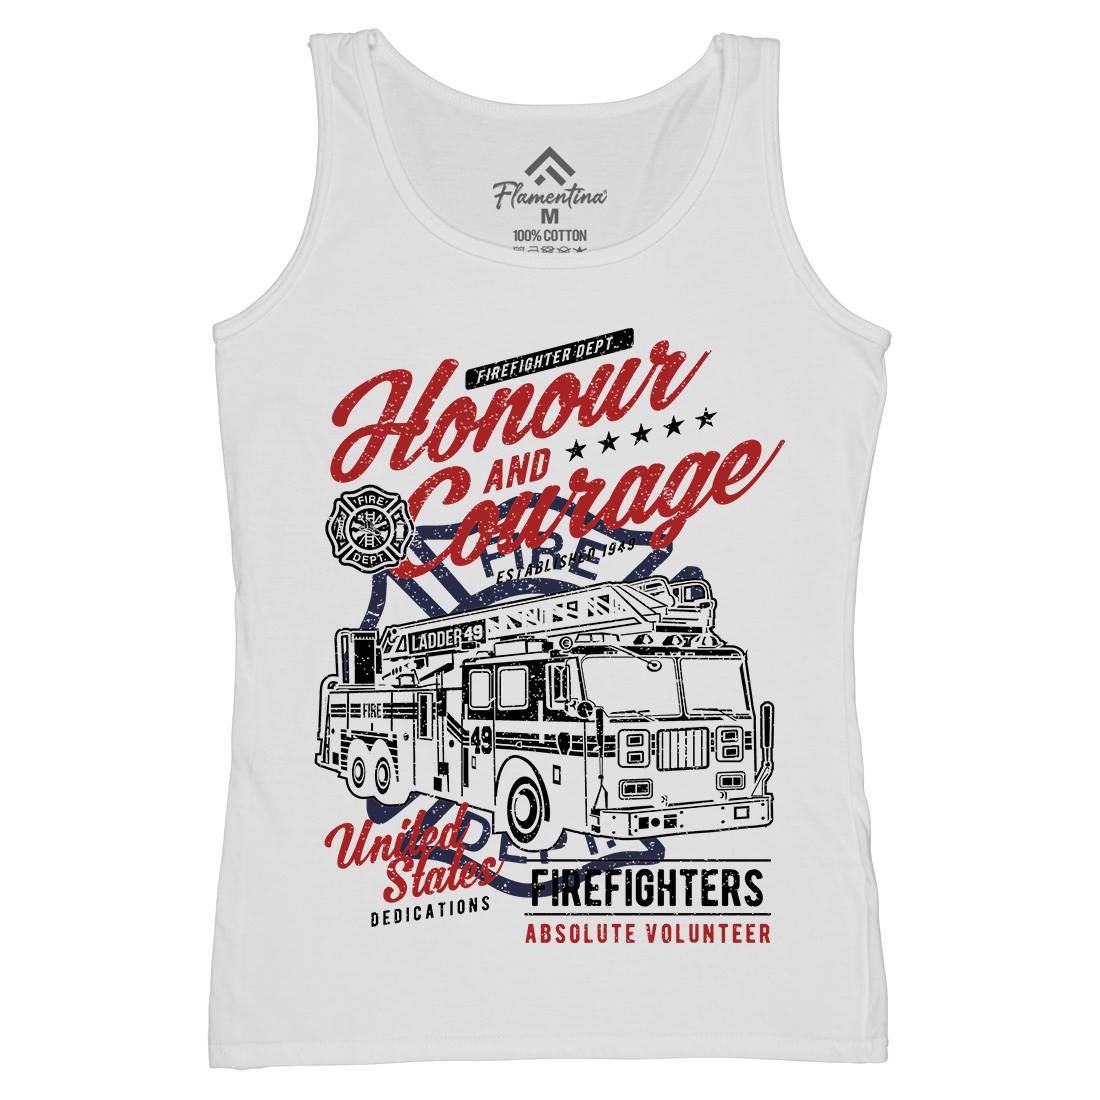 Honour And Courage Womens Organic Tank Top Vest Firefighters A684